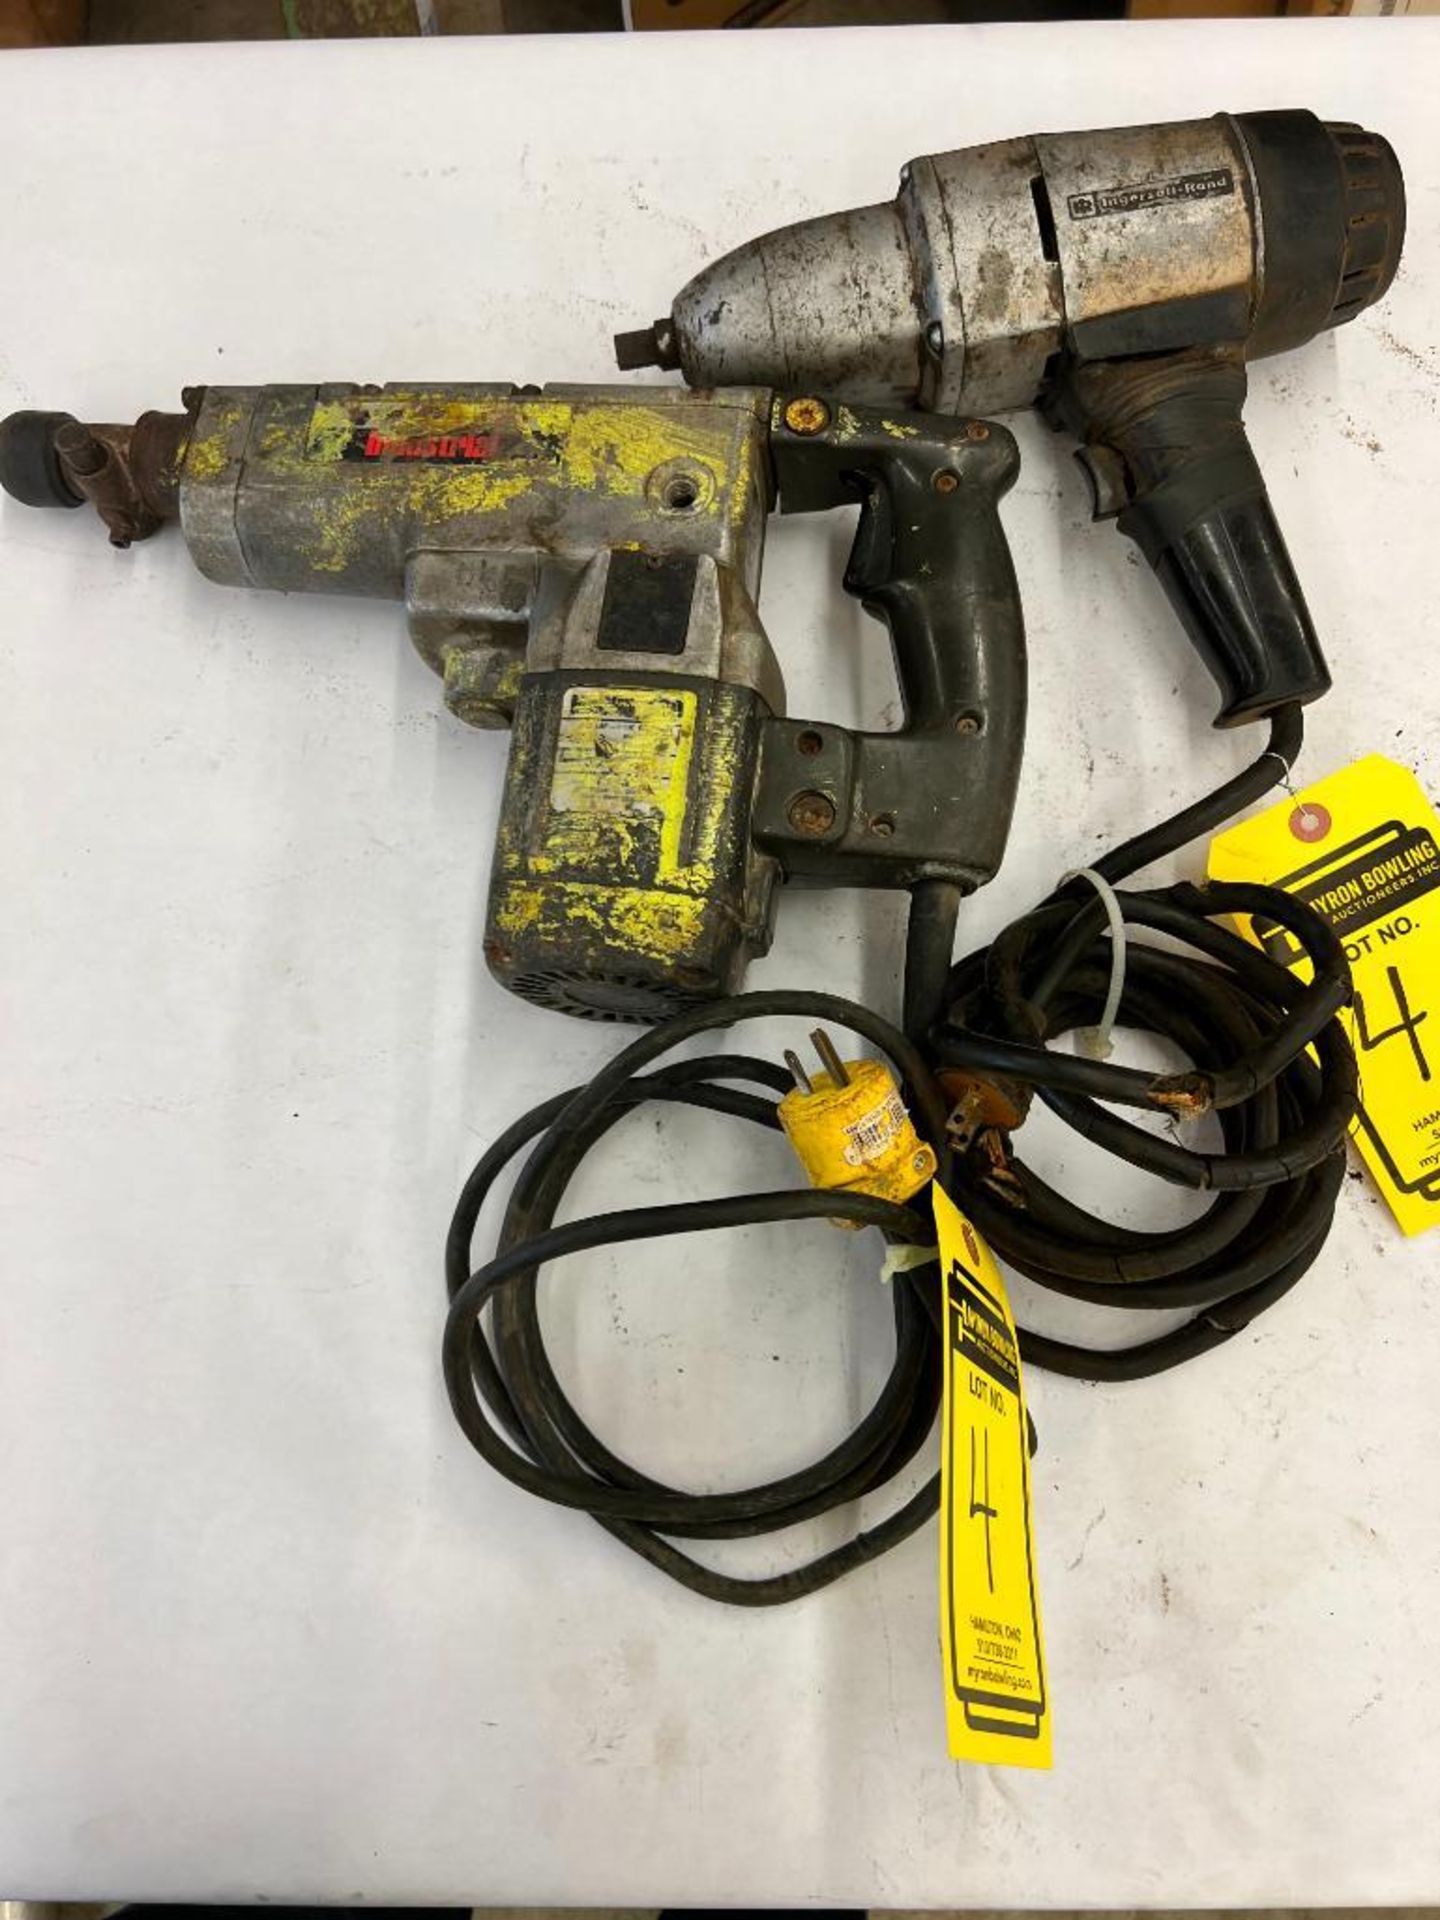 (1) INGERSOLL RAND ELECTRIC 1-1/4" ROTARY HAMMER DRILL, MODEL 5044-09, TYPE 2, (1) INGERSOLL RAND EL